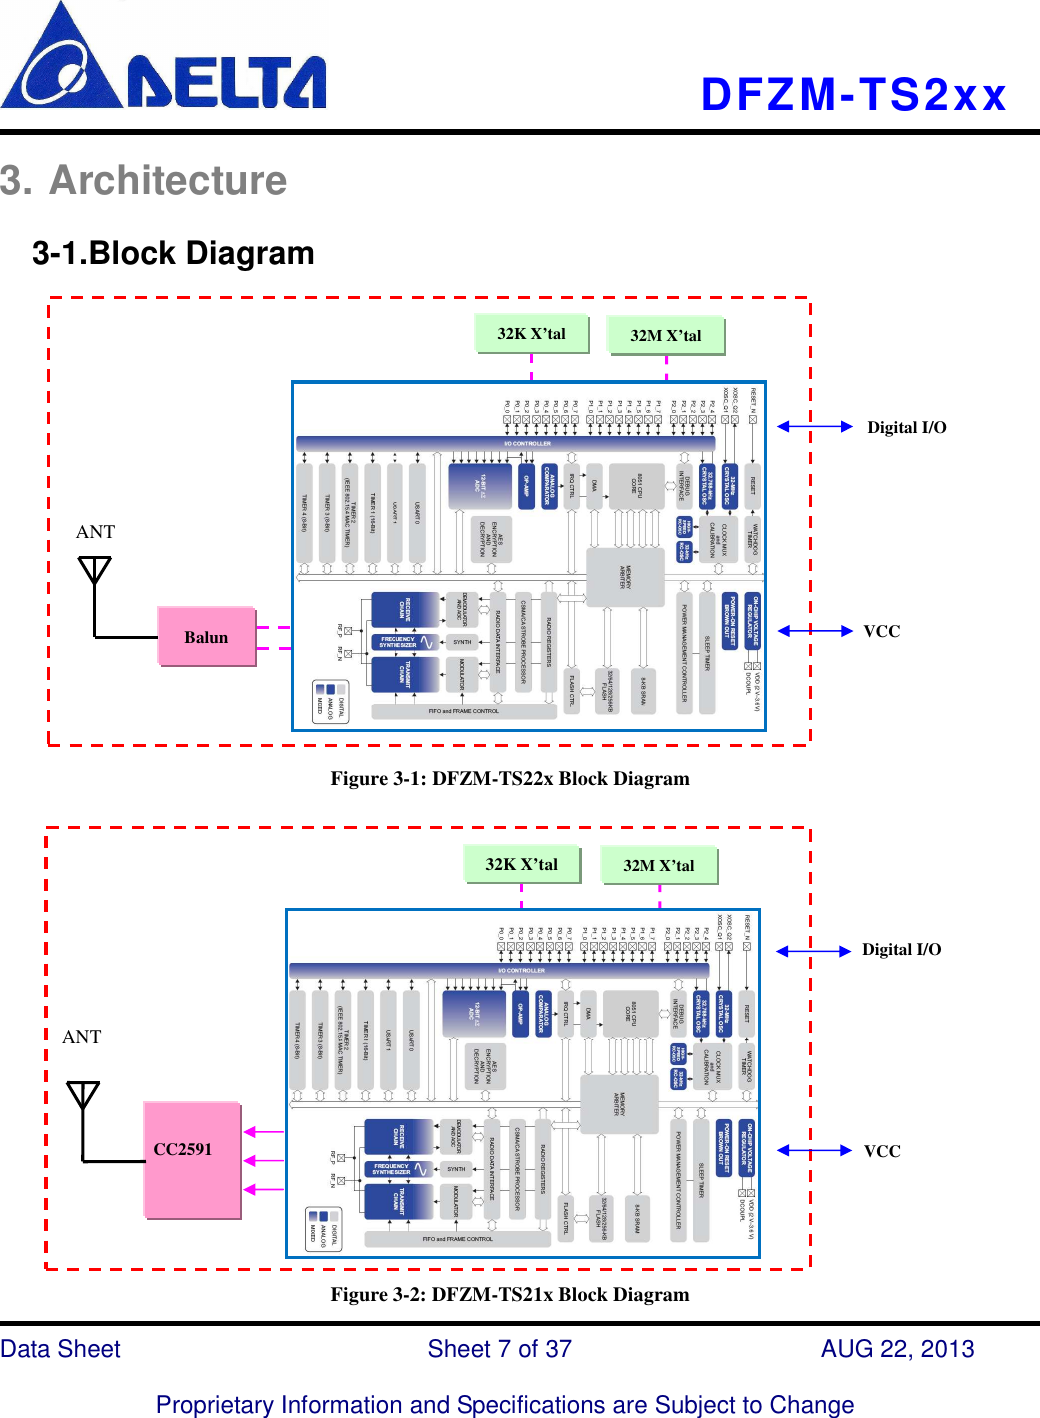    DFZM-TS2xx   Data Sheet                              Sheet 7 of 37                    AUG 22, 2013  Proprietary Information and Specifications are Subject to Change 3. Architecture 3-1.Block Diagram  Figure 3-1: DFZM-TS22x Block Diagram    Figure 3-2: DFZM-TS21x Block Diagram CC2591 ANT 32K X’tal 32M X’tal Balun 32K X’tal ANT 32M X’tal Digital I/O VCC VCC Digital I/O 